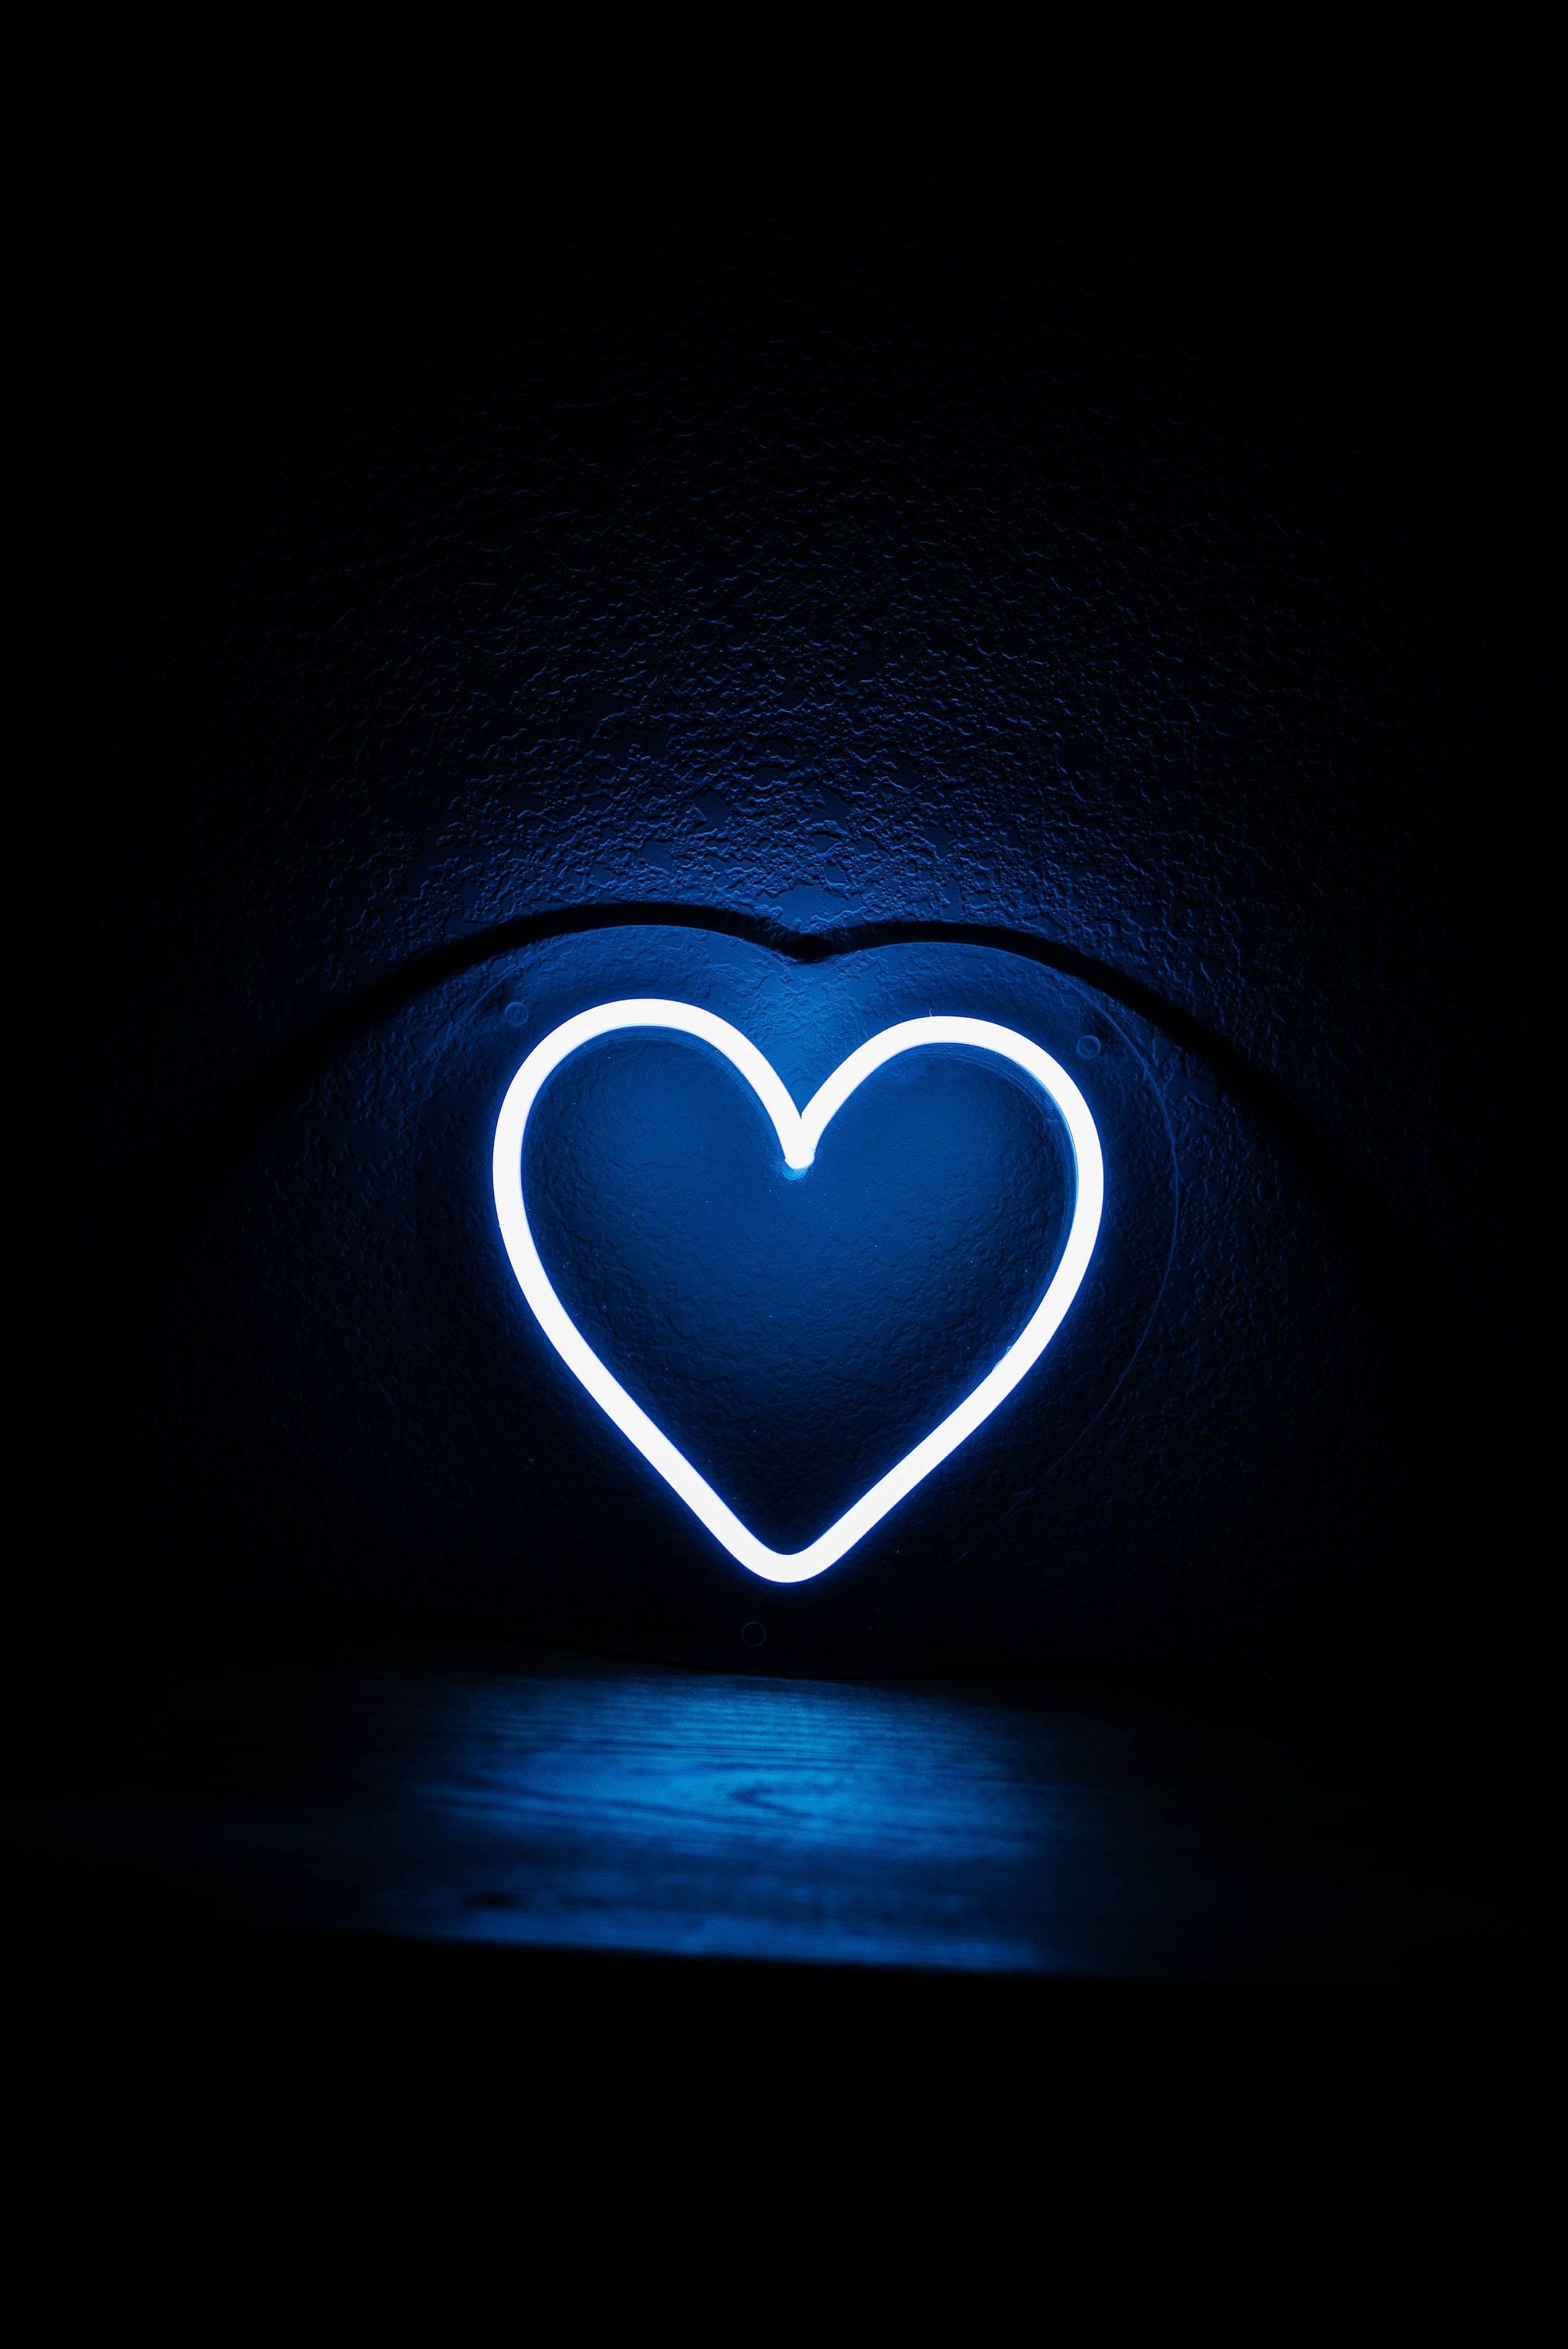 Blue Heart Stock Photos and Images  123RF